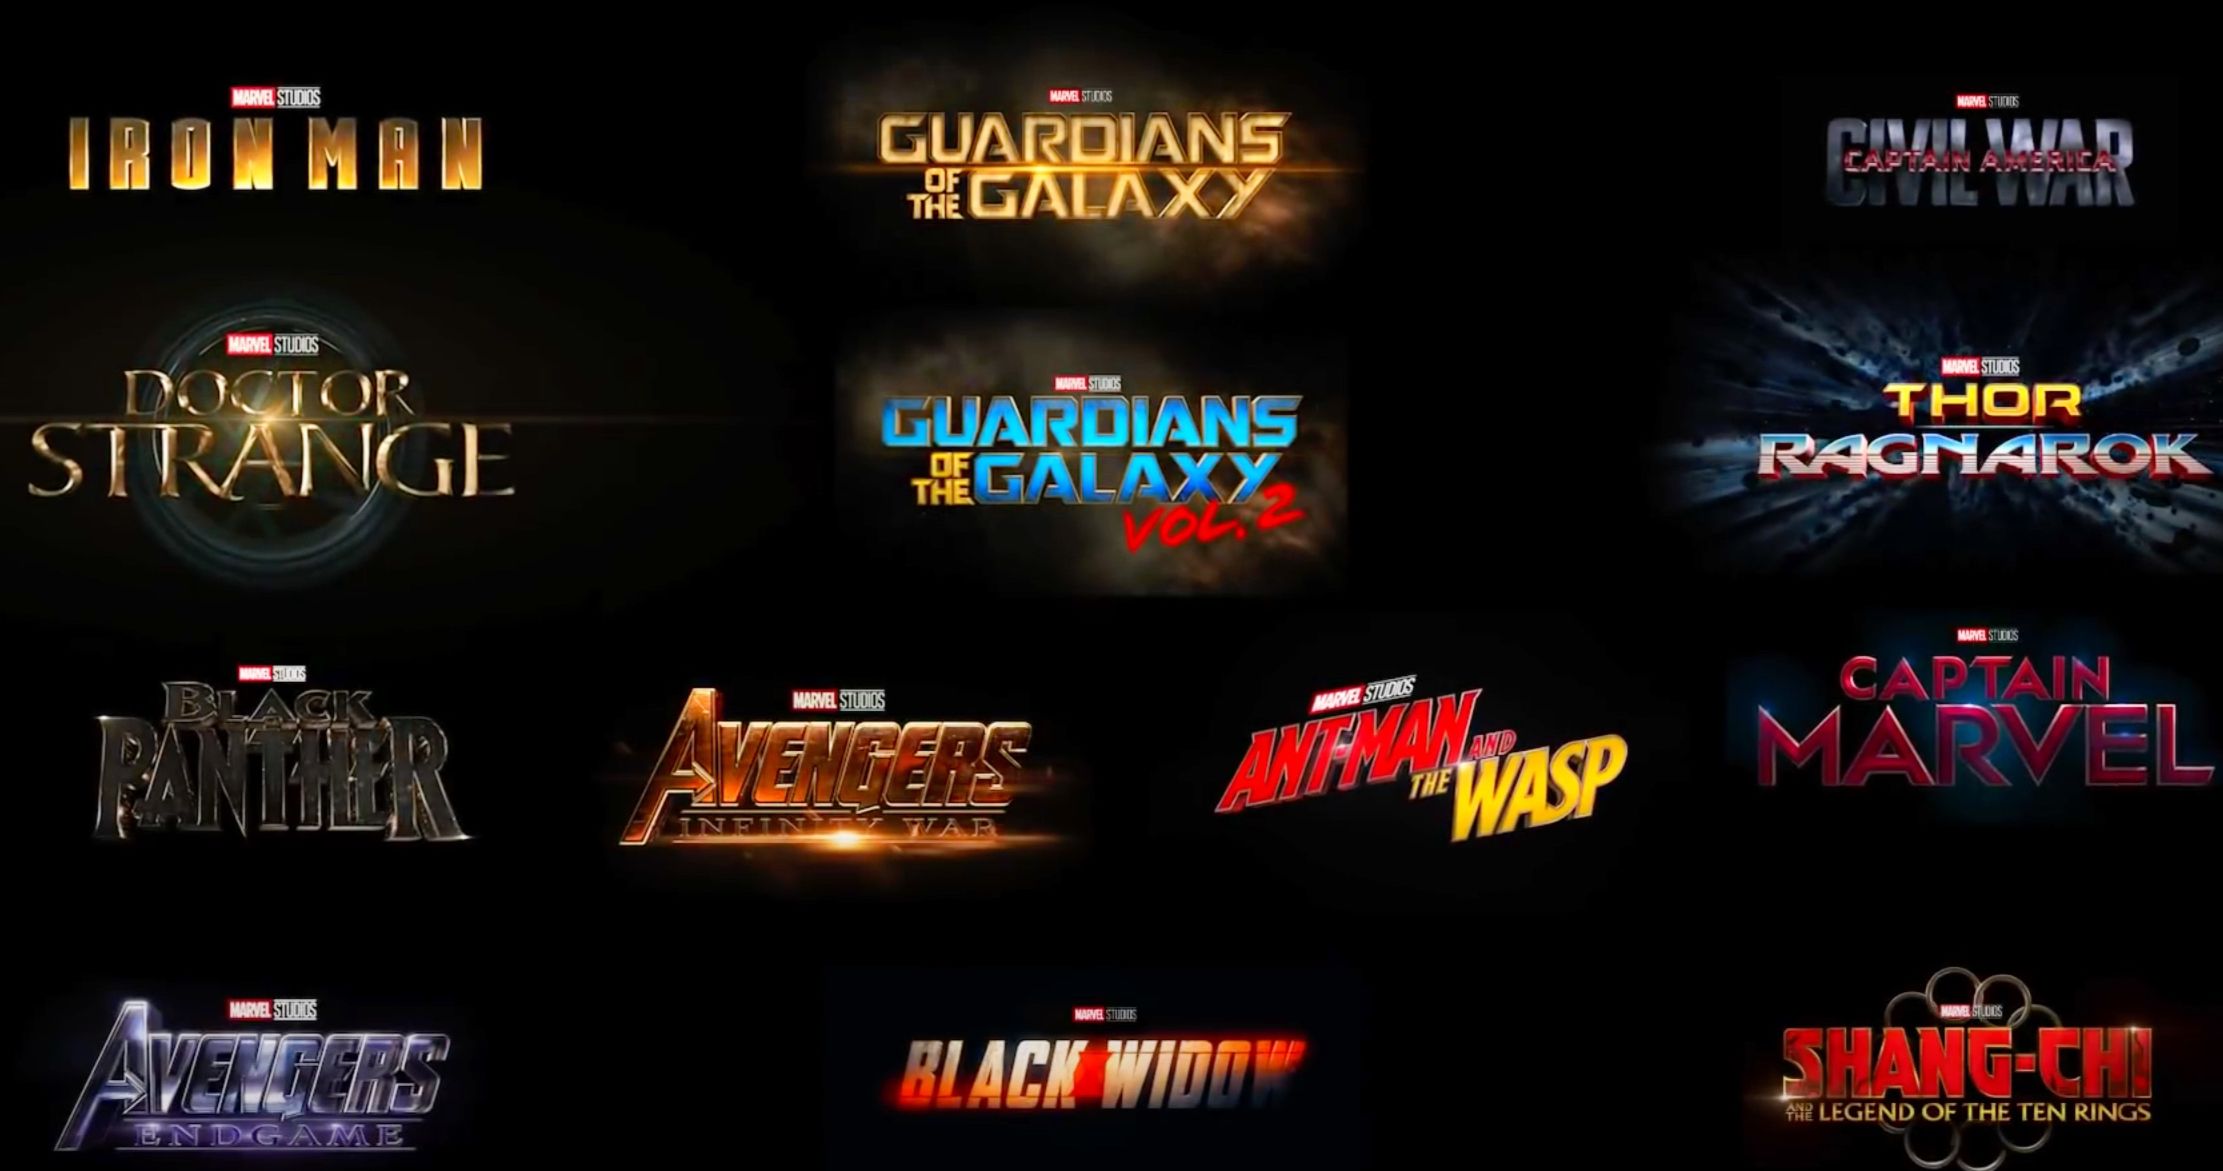 IMAX Enhanced Brings the Immersive Format to the MCU on Disney+ This November